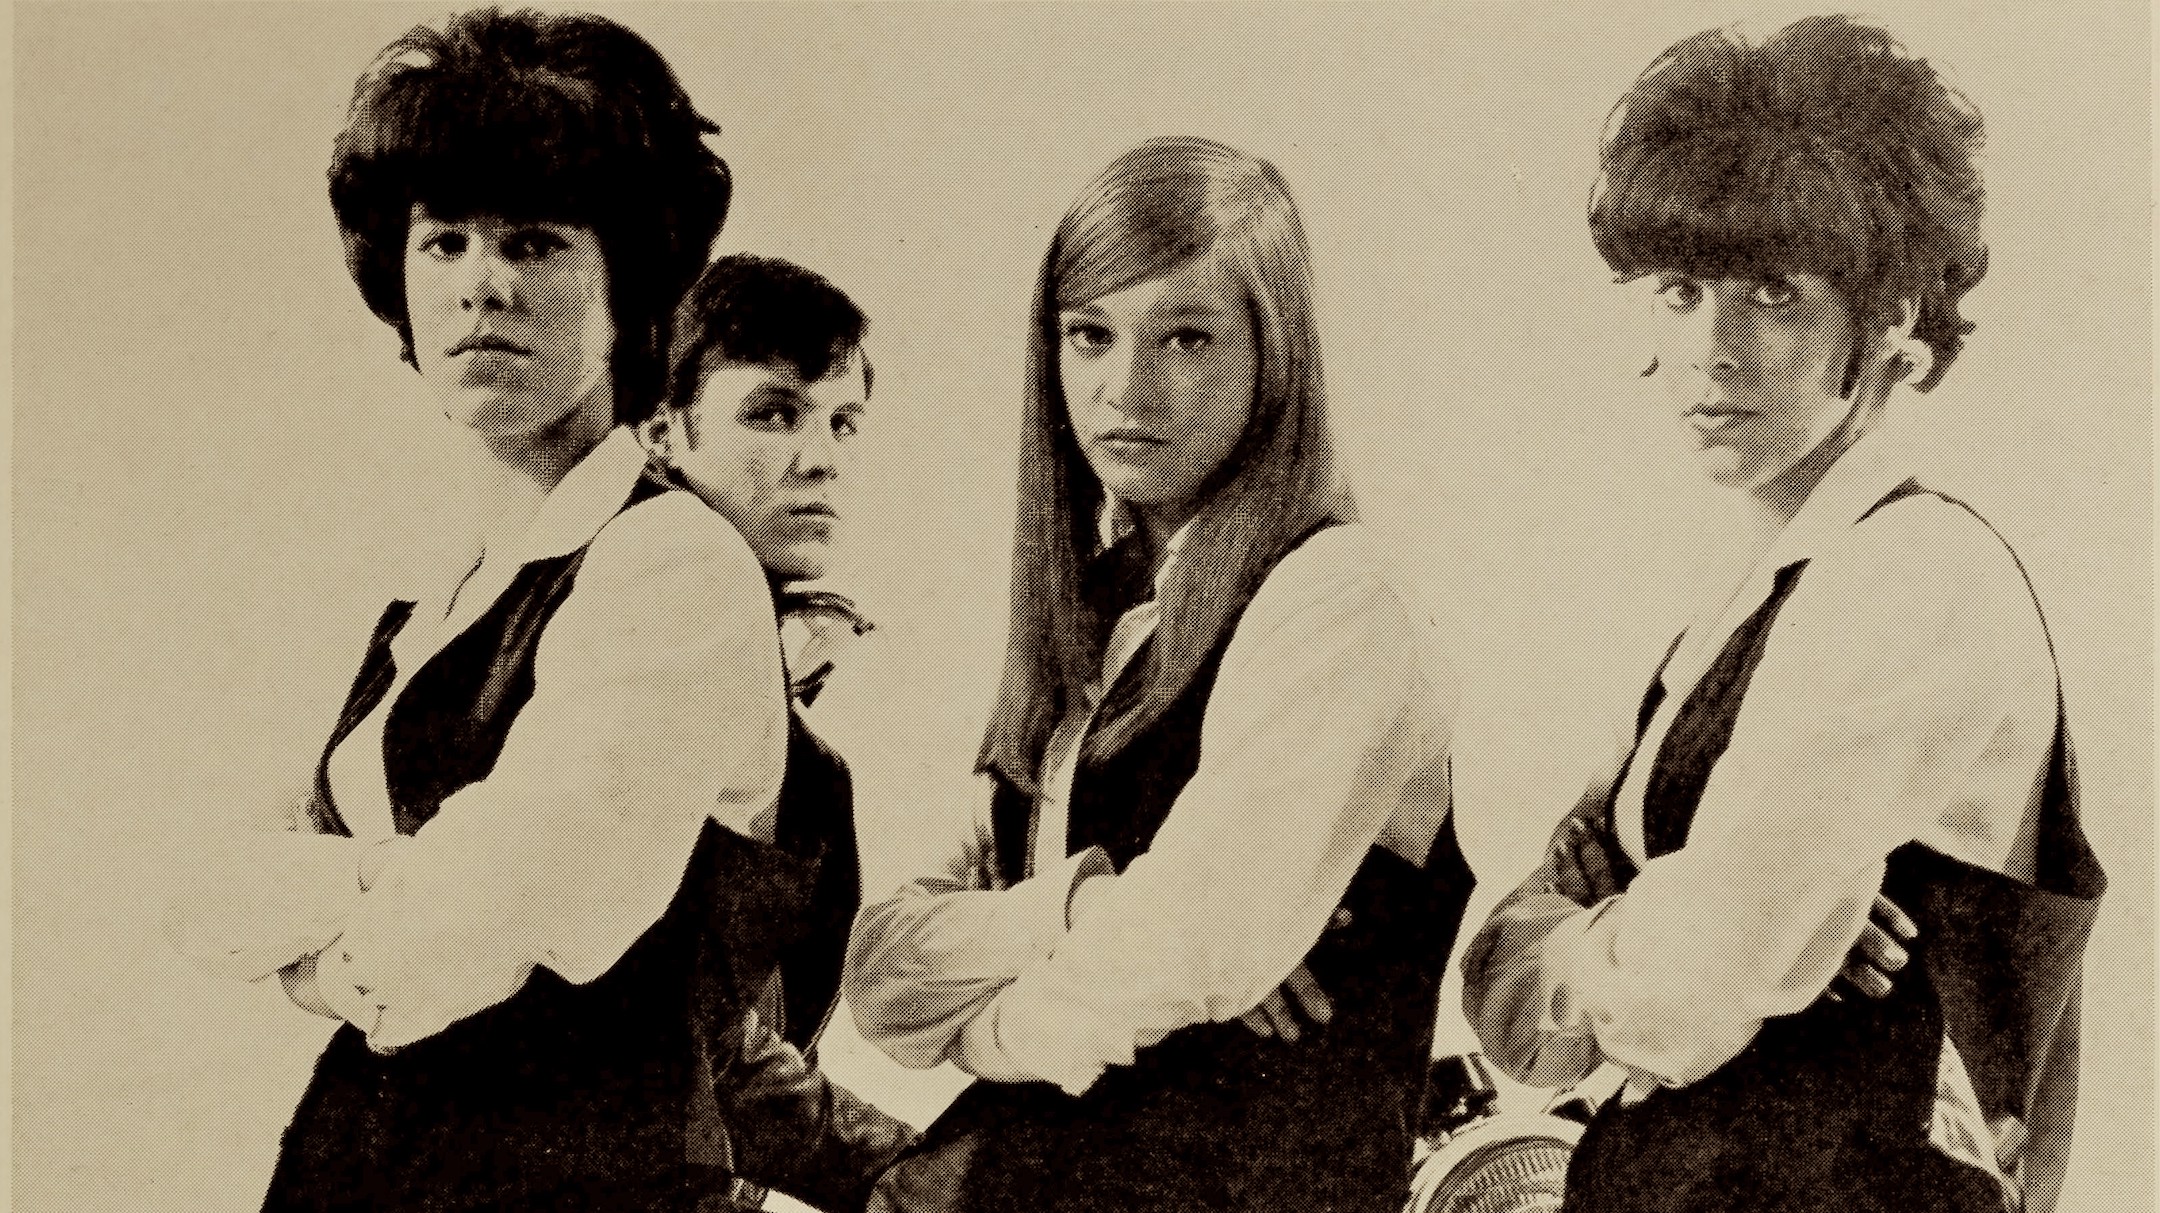 Mary Weiss of The Shangri-Las.